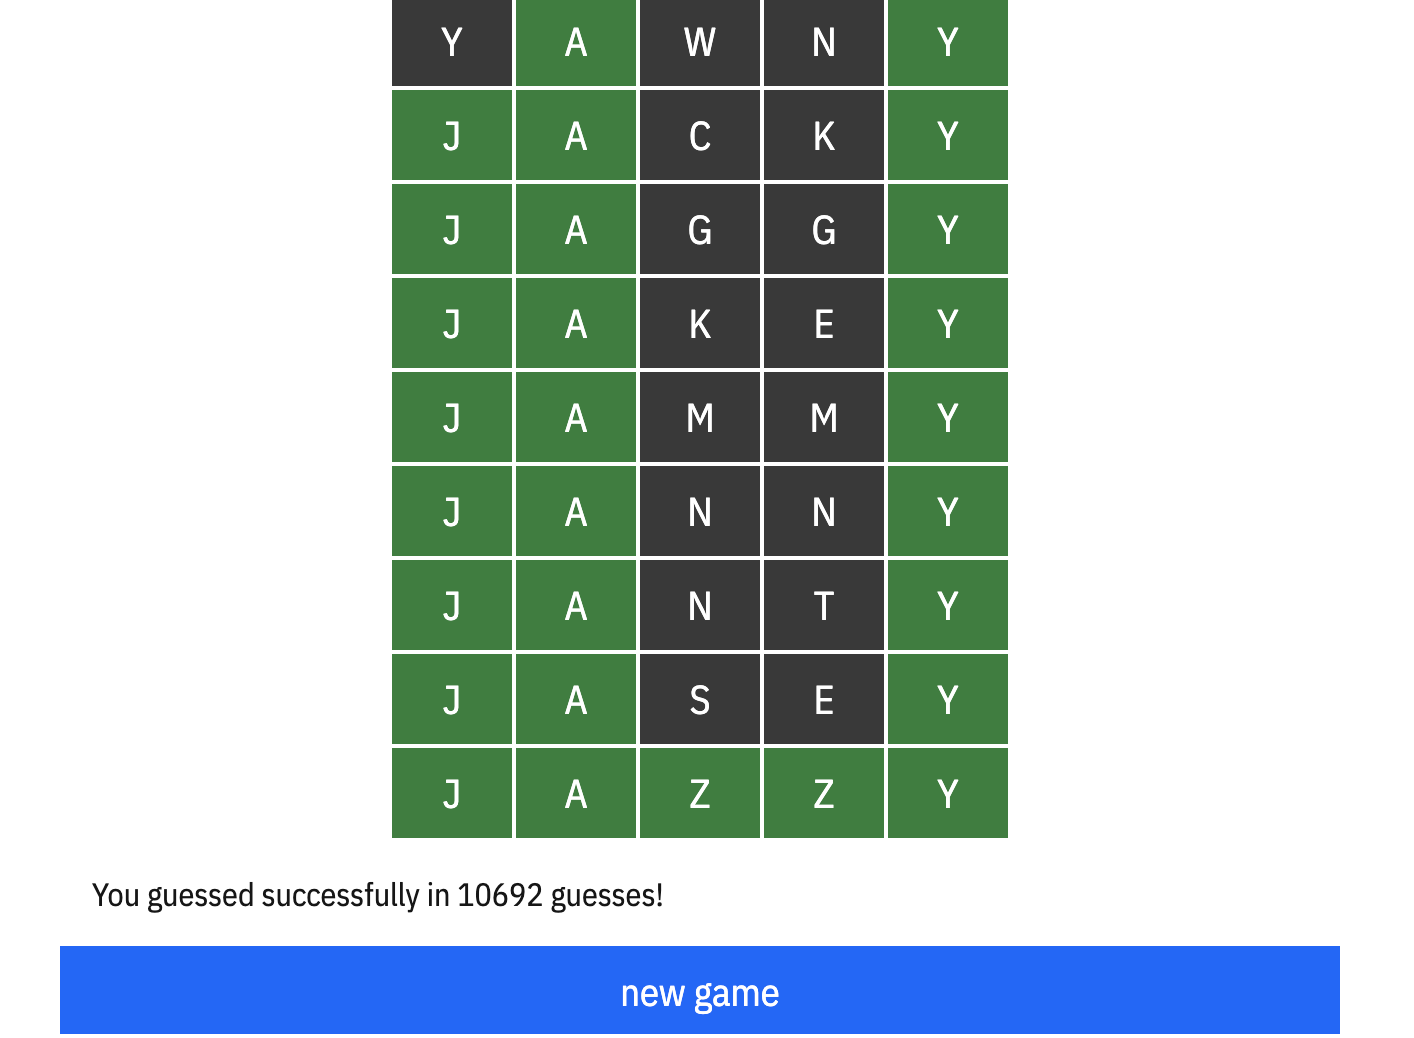 Screenshot of Absurdle showing the last few guesses of our 10692-guess game, ending with jazzy